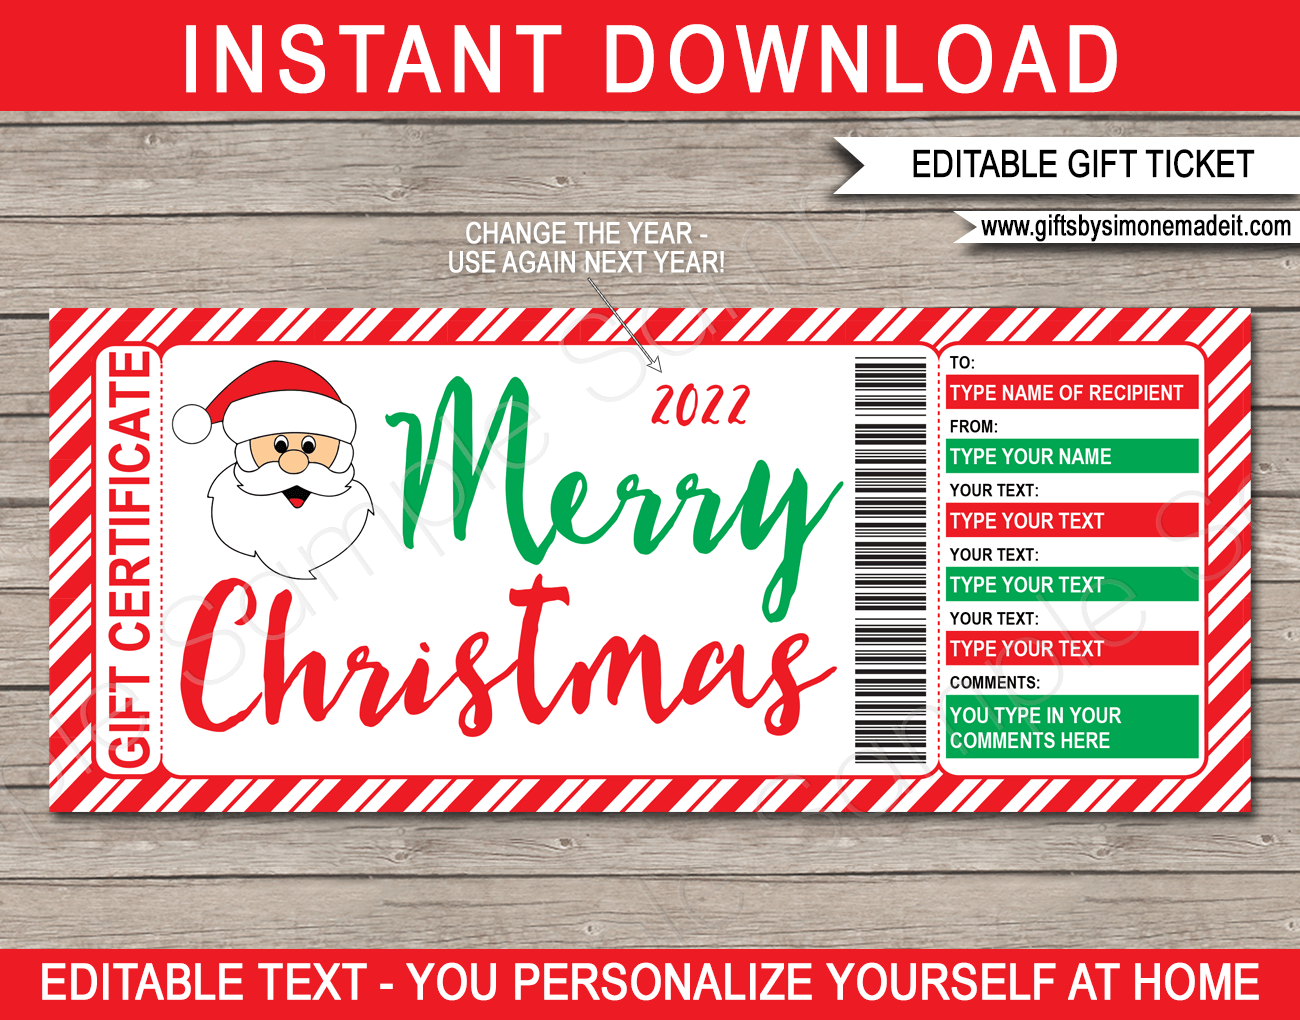 Christmas Santa Gift Certificate Template | Editable & Printable Gift Voucher | Personalized Custom Santa Claus Gift Card | Instant Download via giftsbysimonemadeit.com